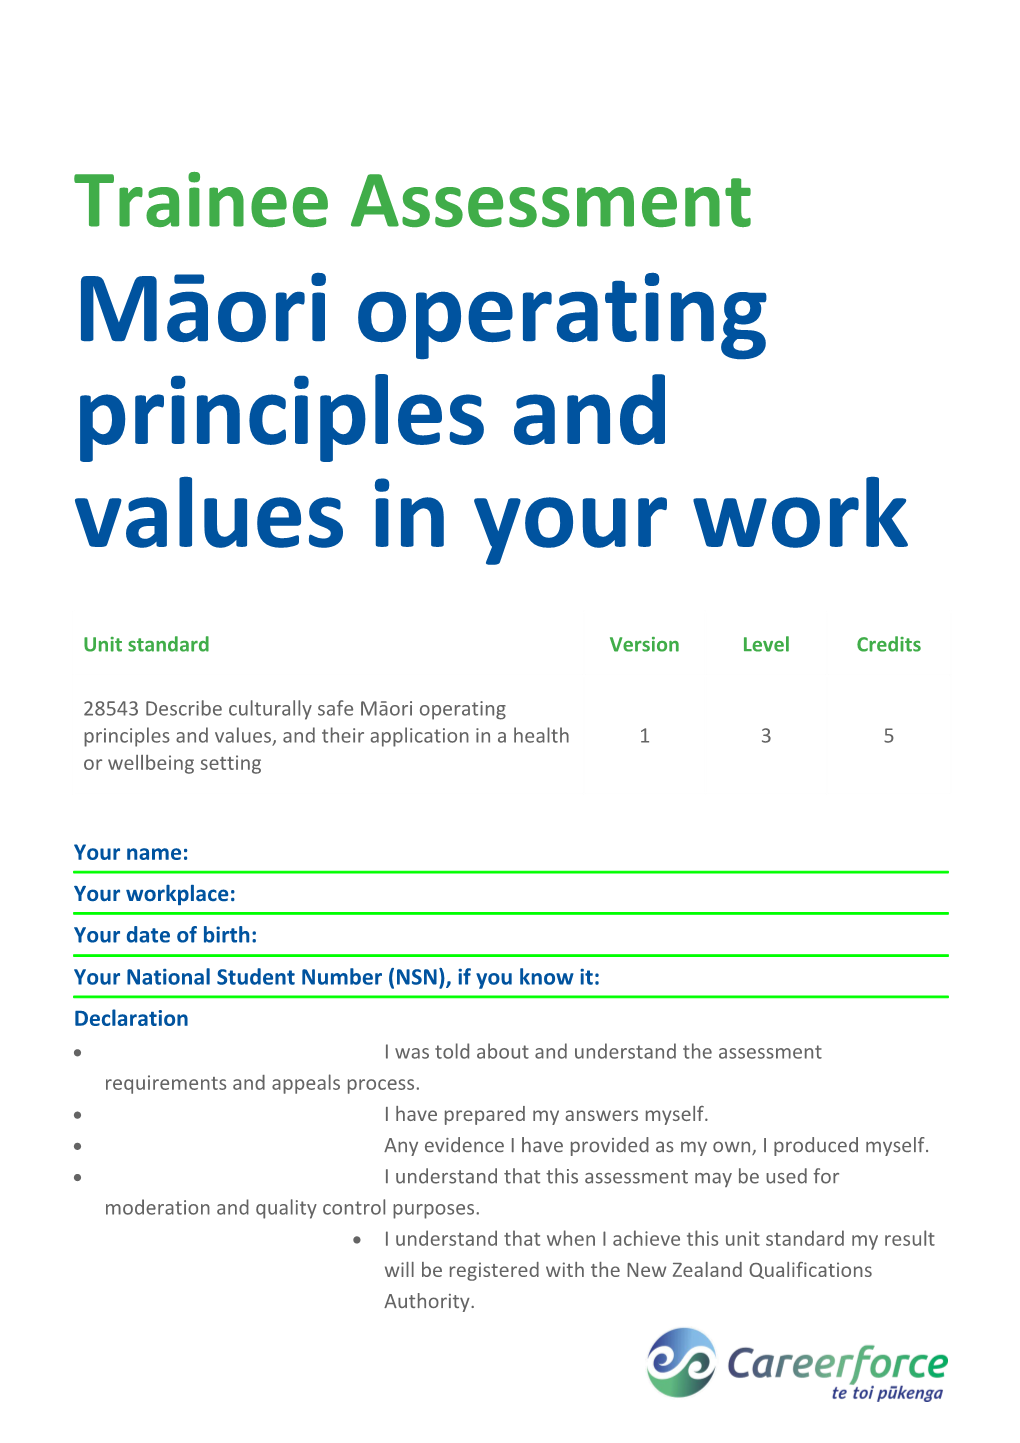 Māori Operating Principles and Values in Your Work